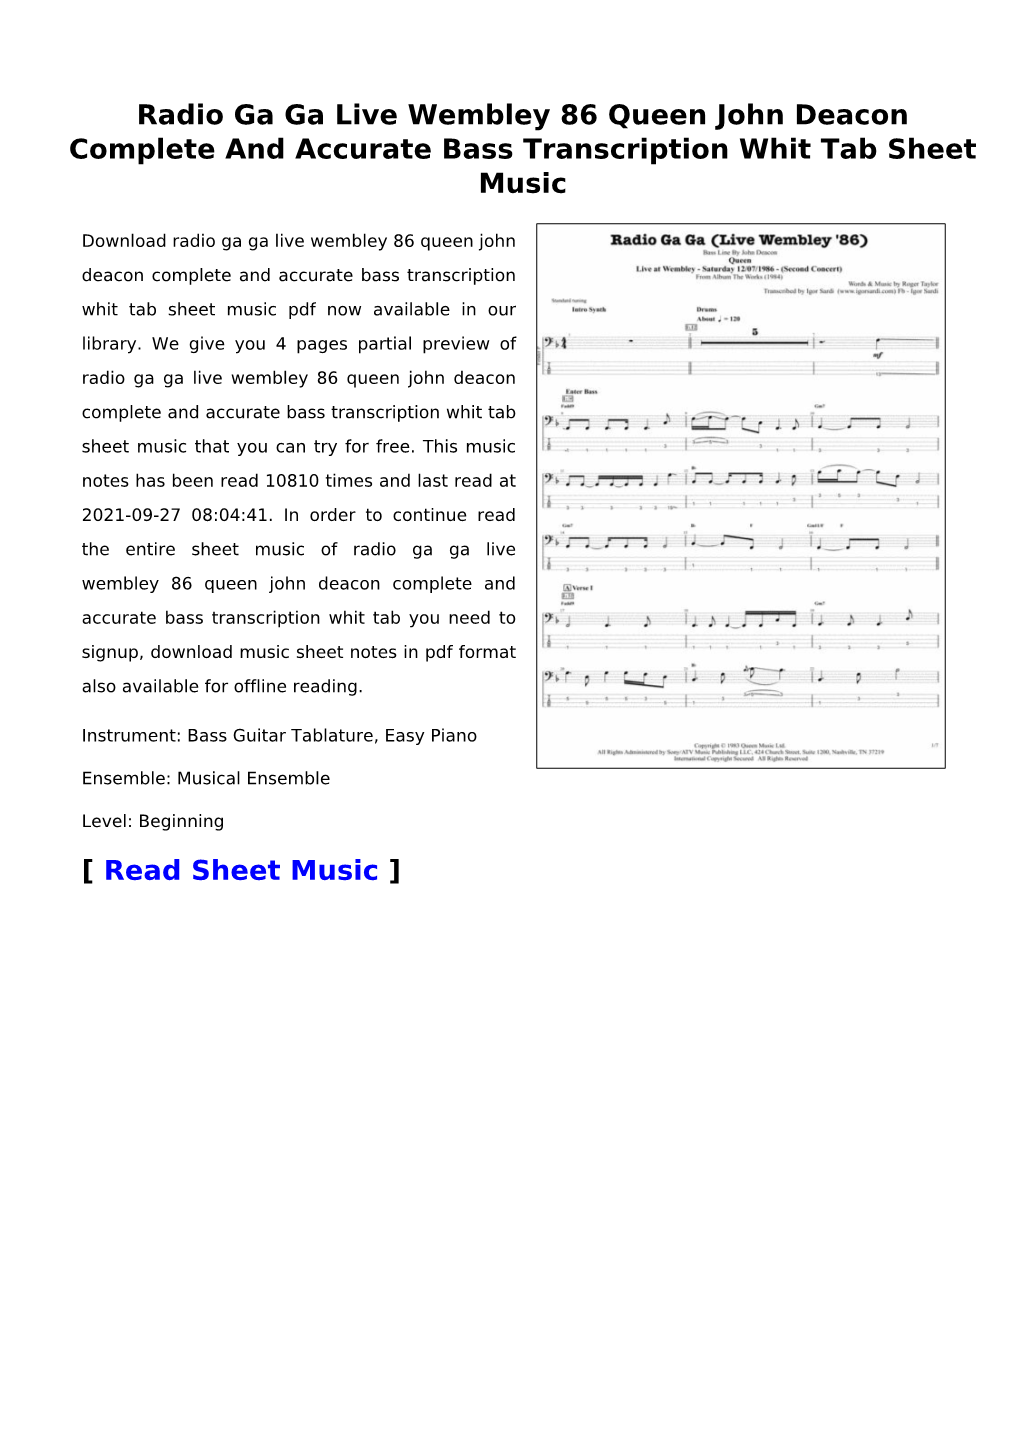 Radio Ga Ga Live Wembley 86 Queen John Deacon Complete and Accurate Bass Transcription Whit Tab Sheet Music